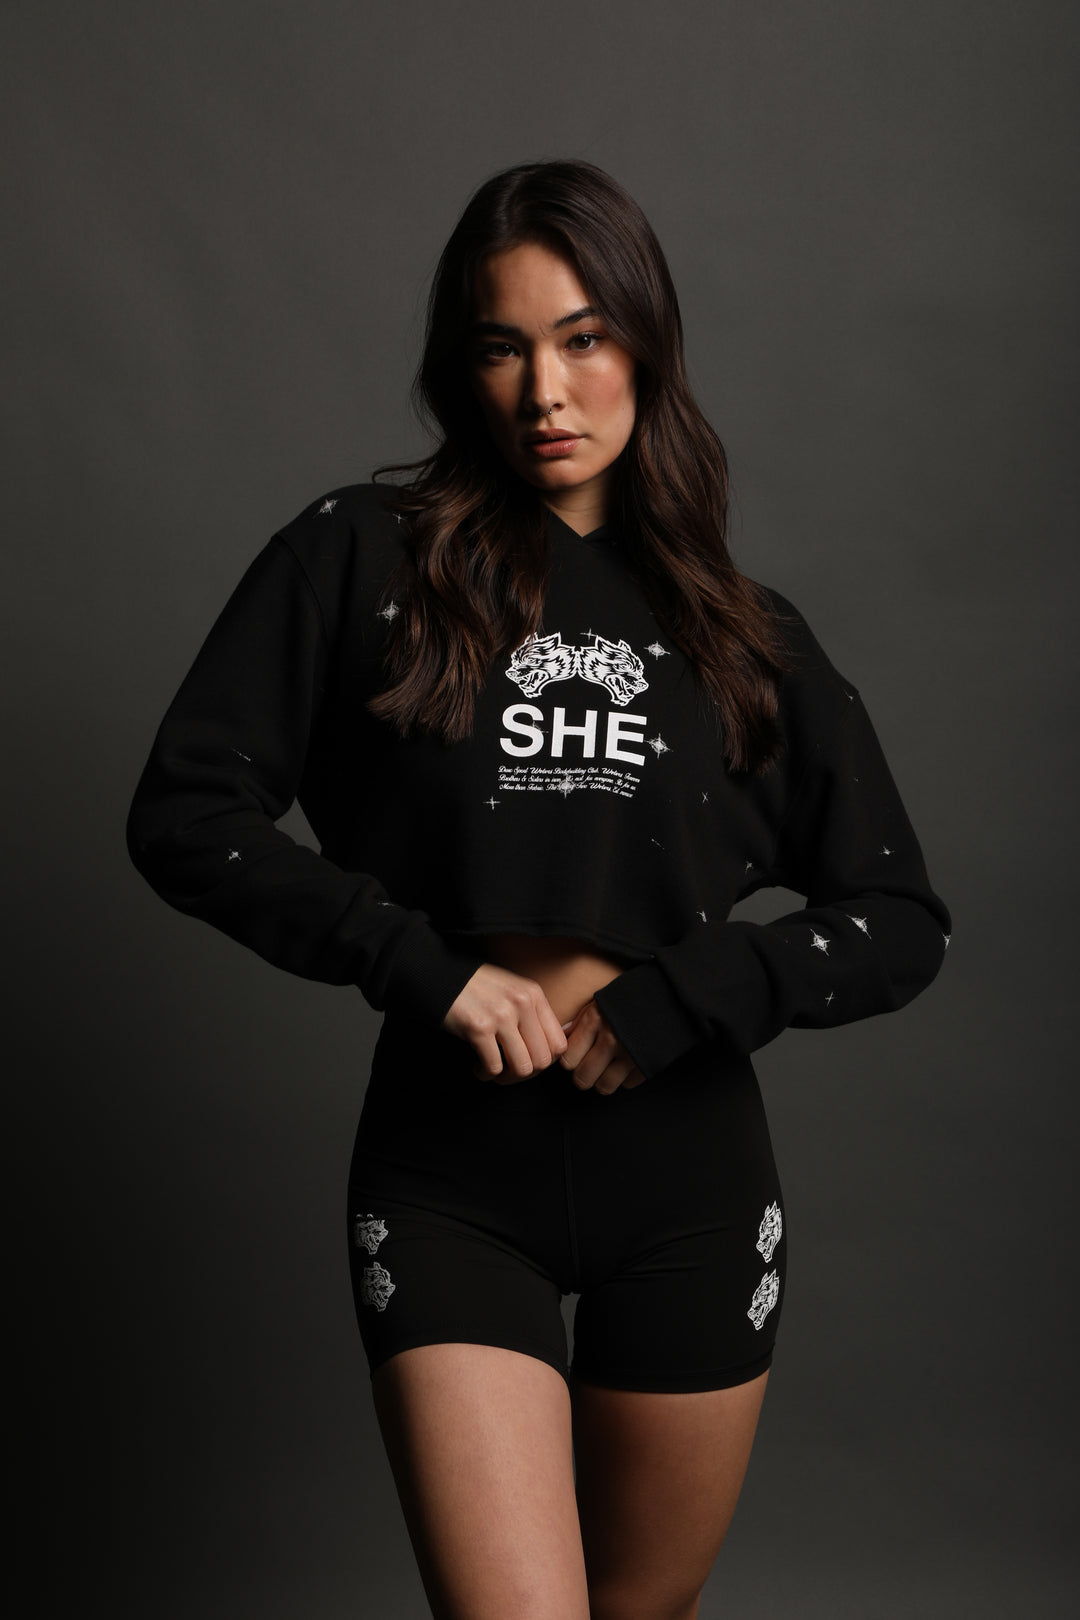 She's Gritty "Pierce" (Cropped) Hoodie in Black/White Starry Night